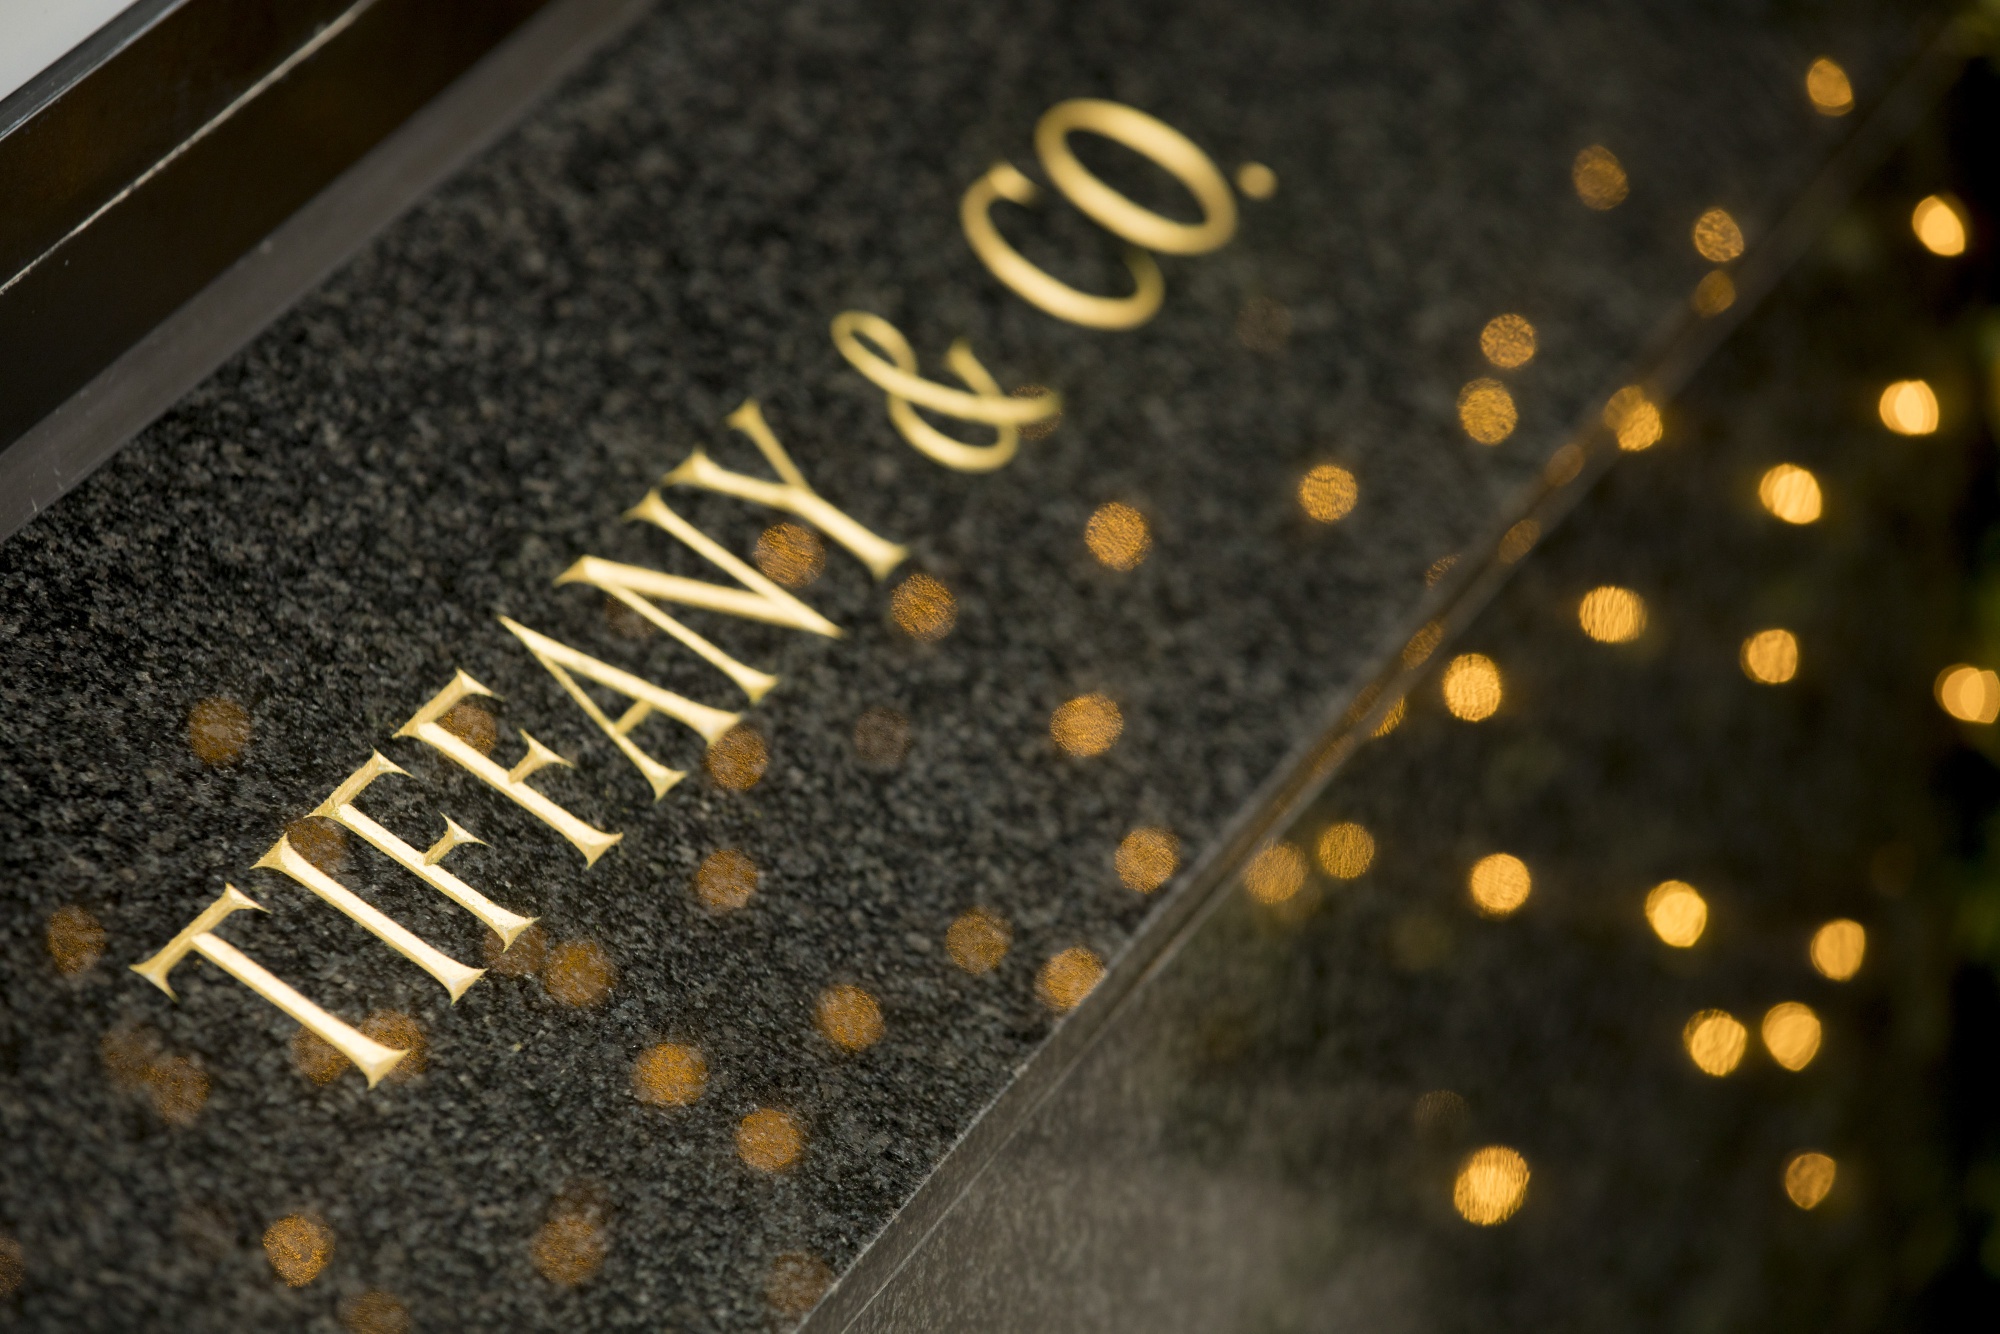 Arnault's Son Touts High-Stakes Bet on Tiffany's NYC Flagship - BNN  Bloomberg